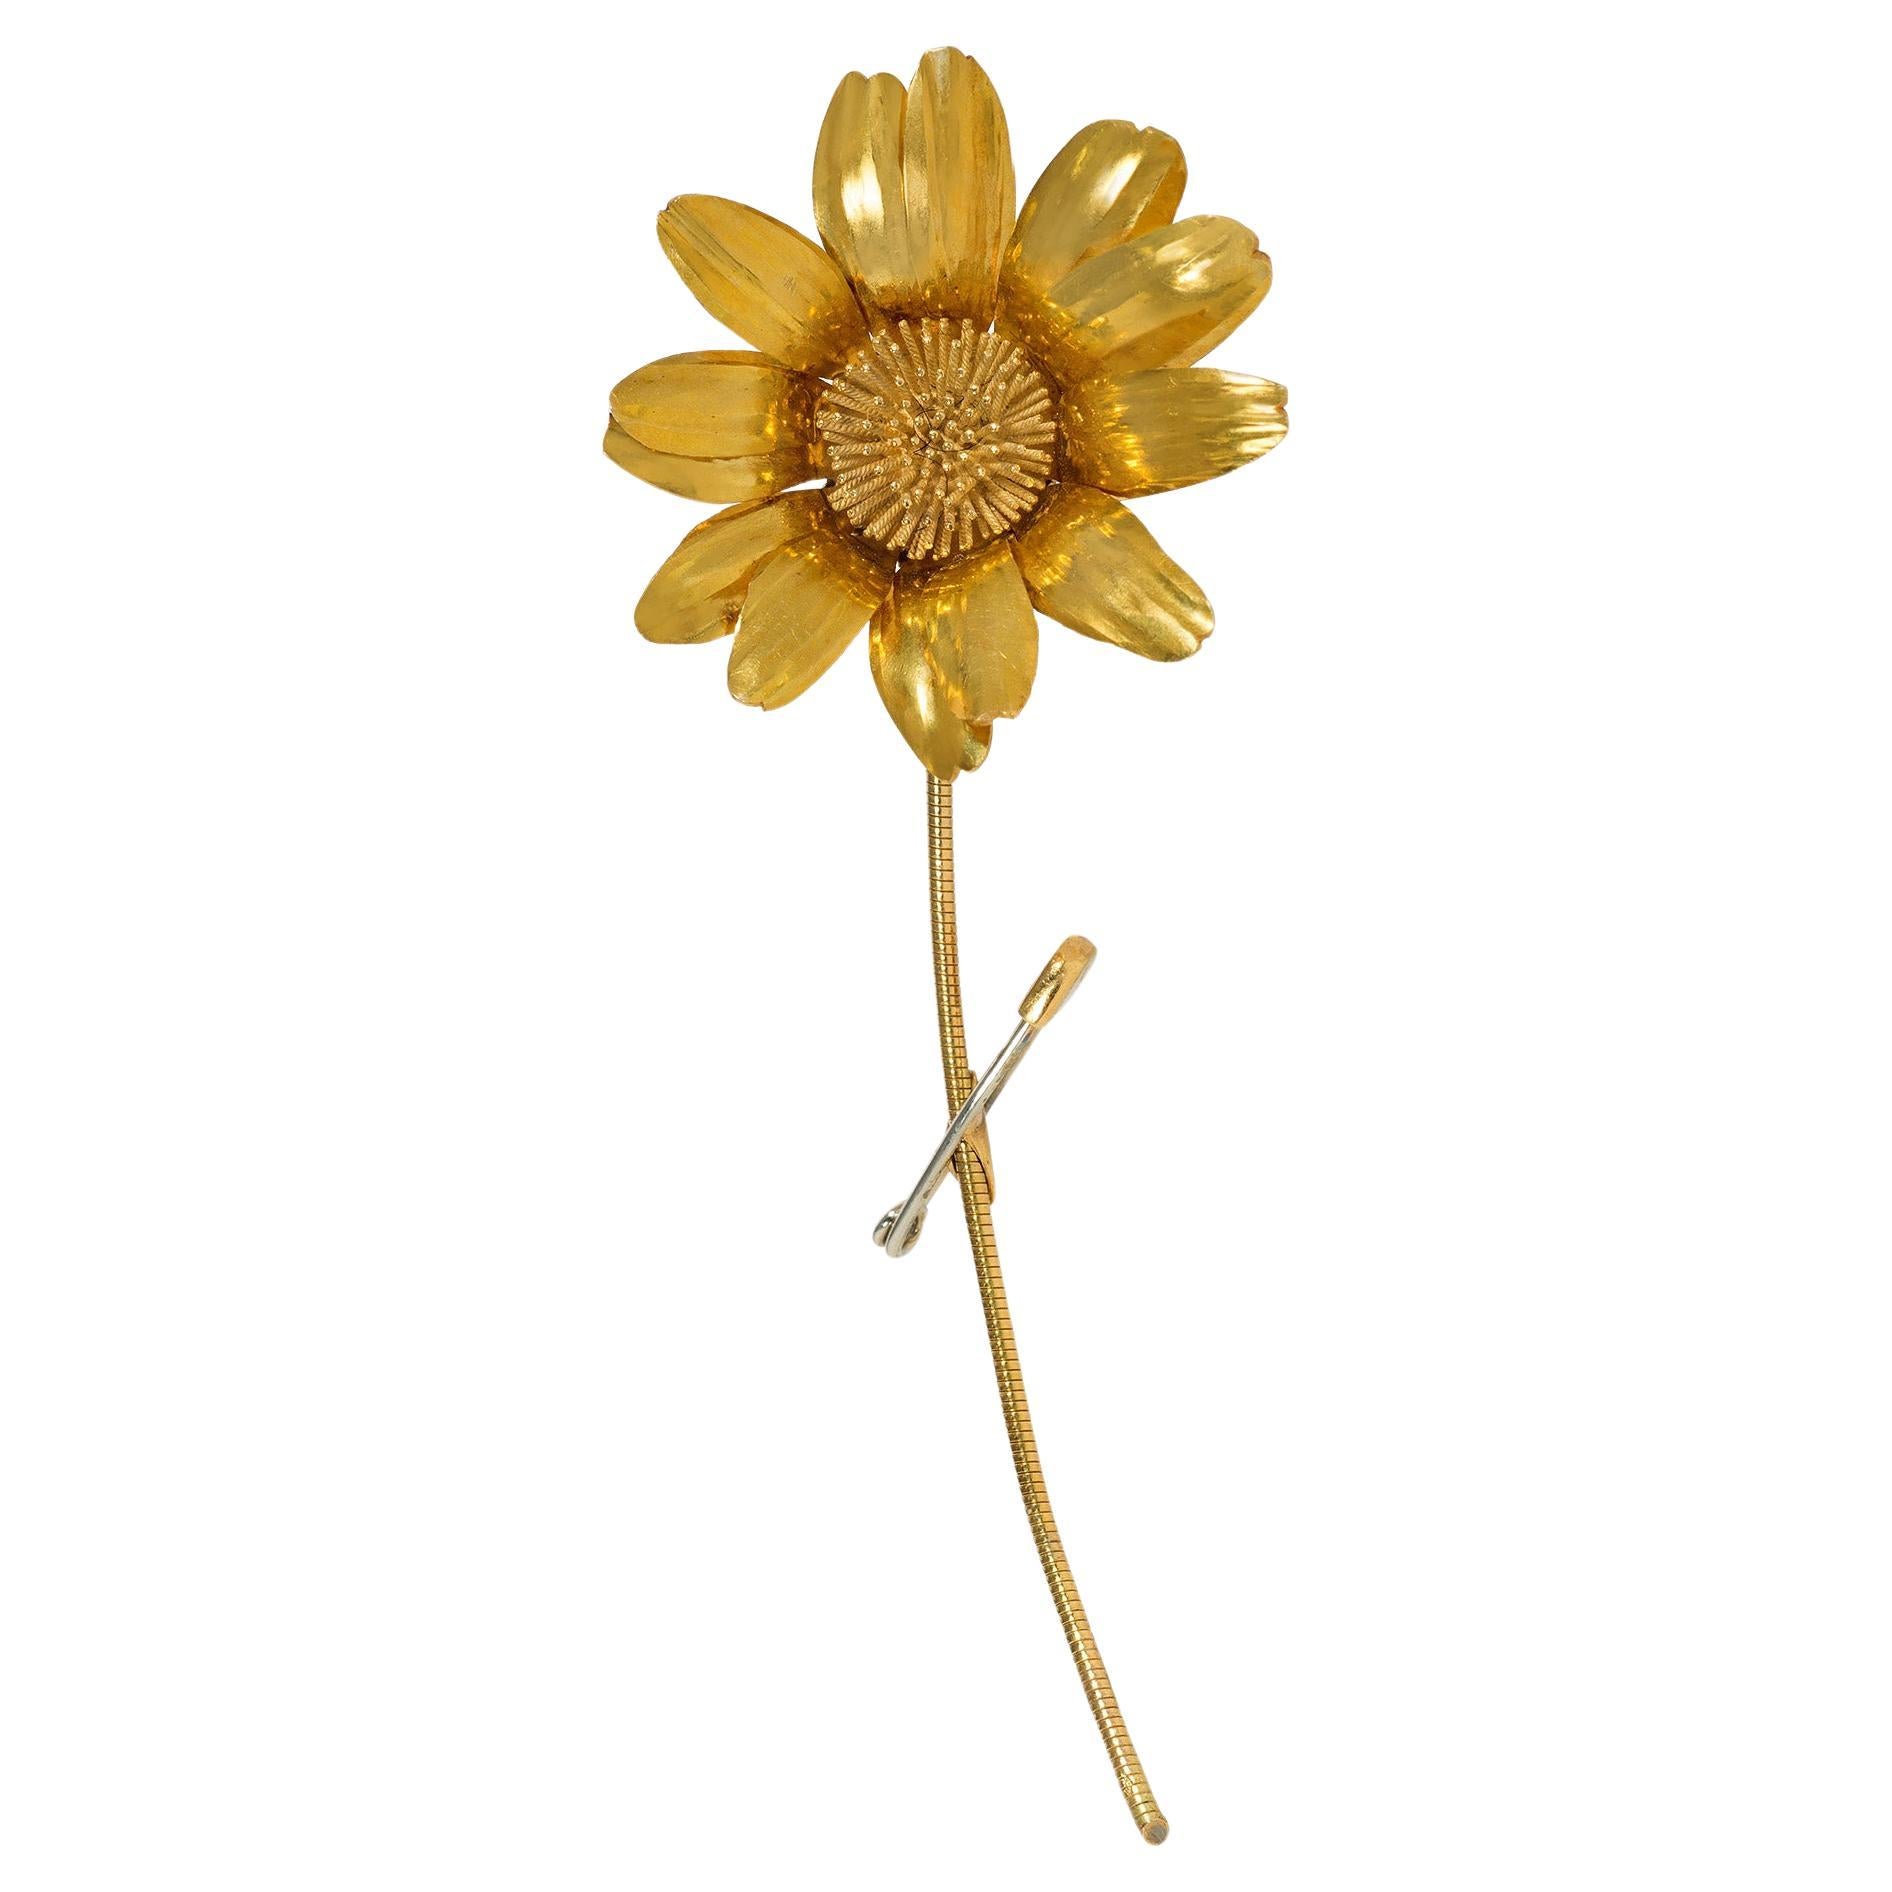 Vintage Hermès Gold Statement Brooch in the Form of a Daisy